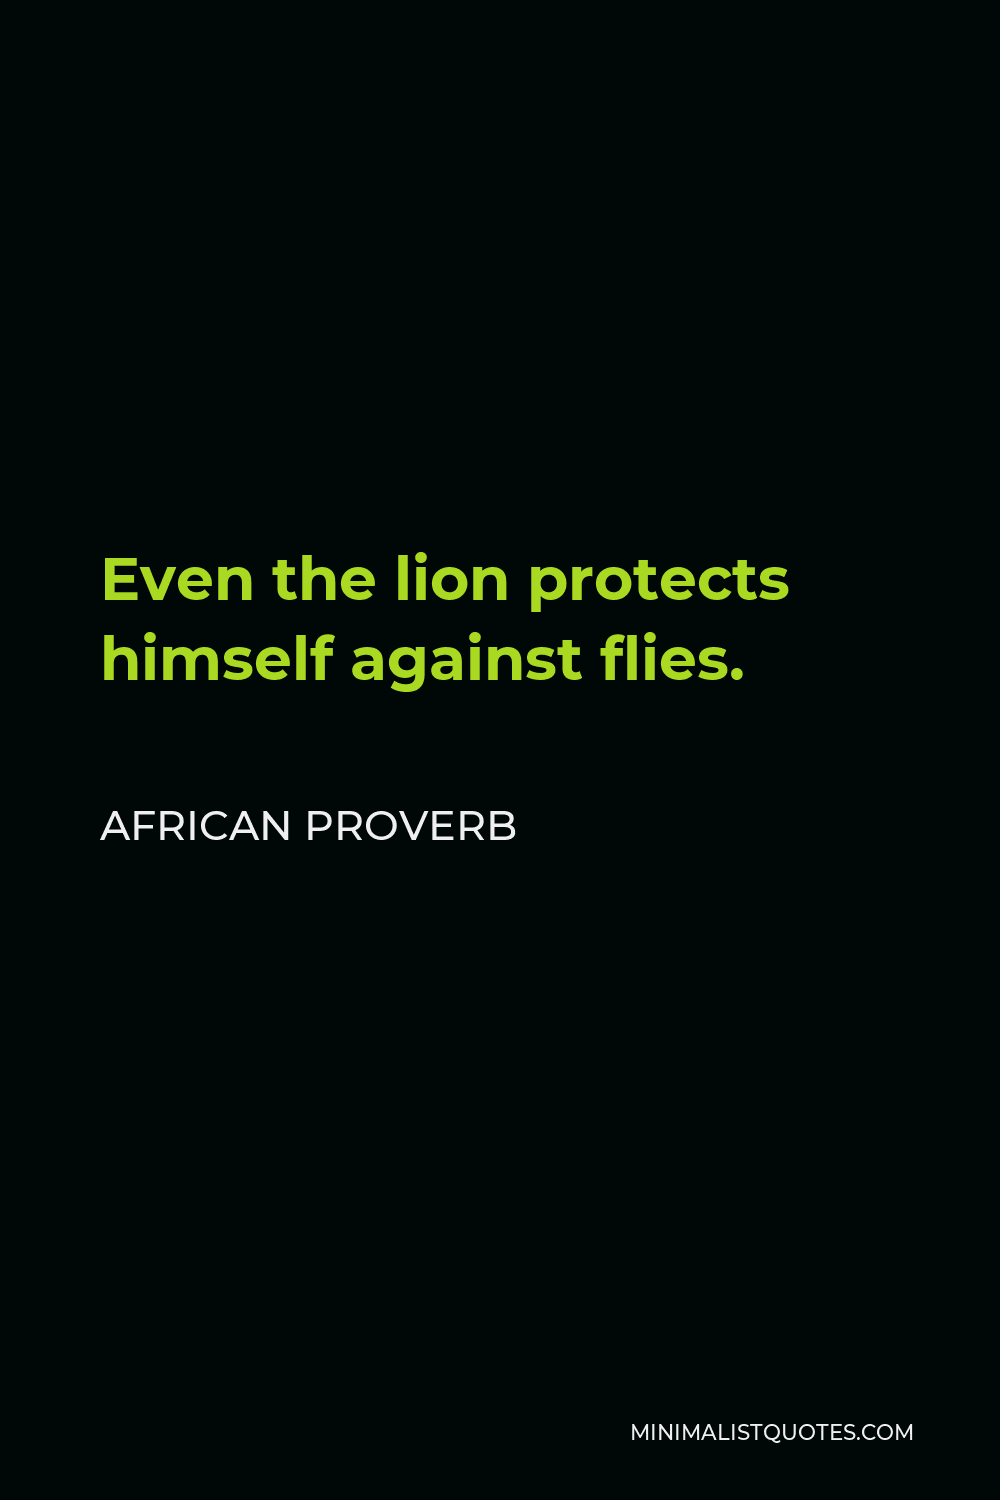 African Proverb Quote - Even the lion protects himself against flies.